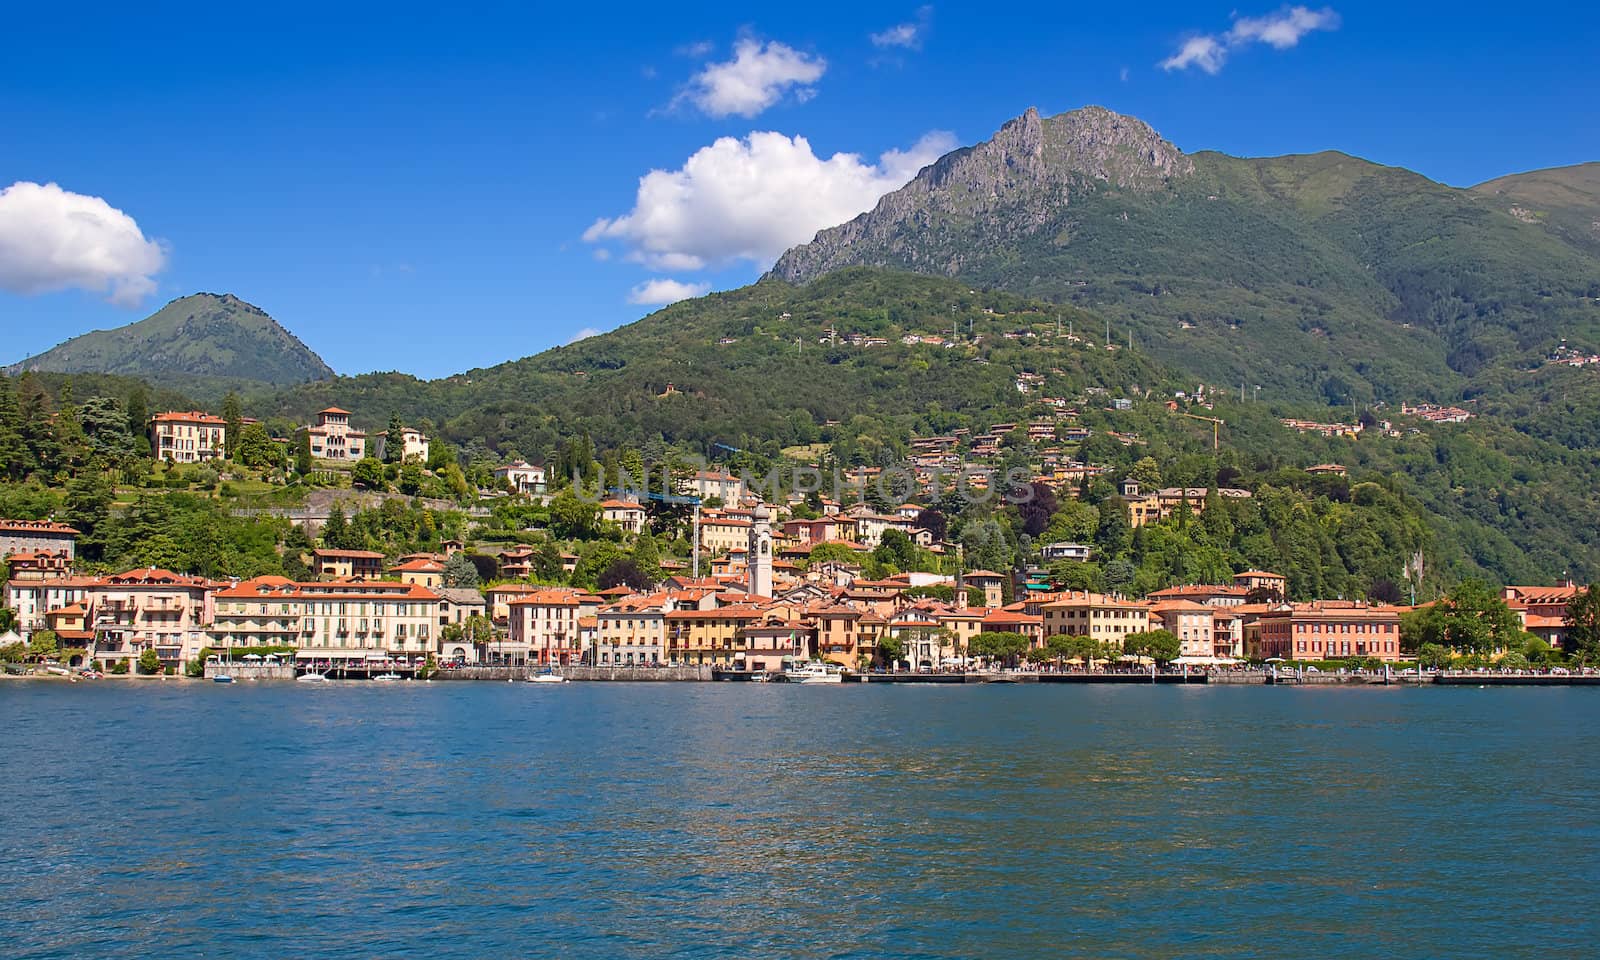 Landscapes around famous lake Como in northern Italy